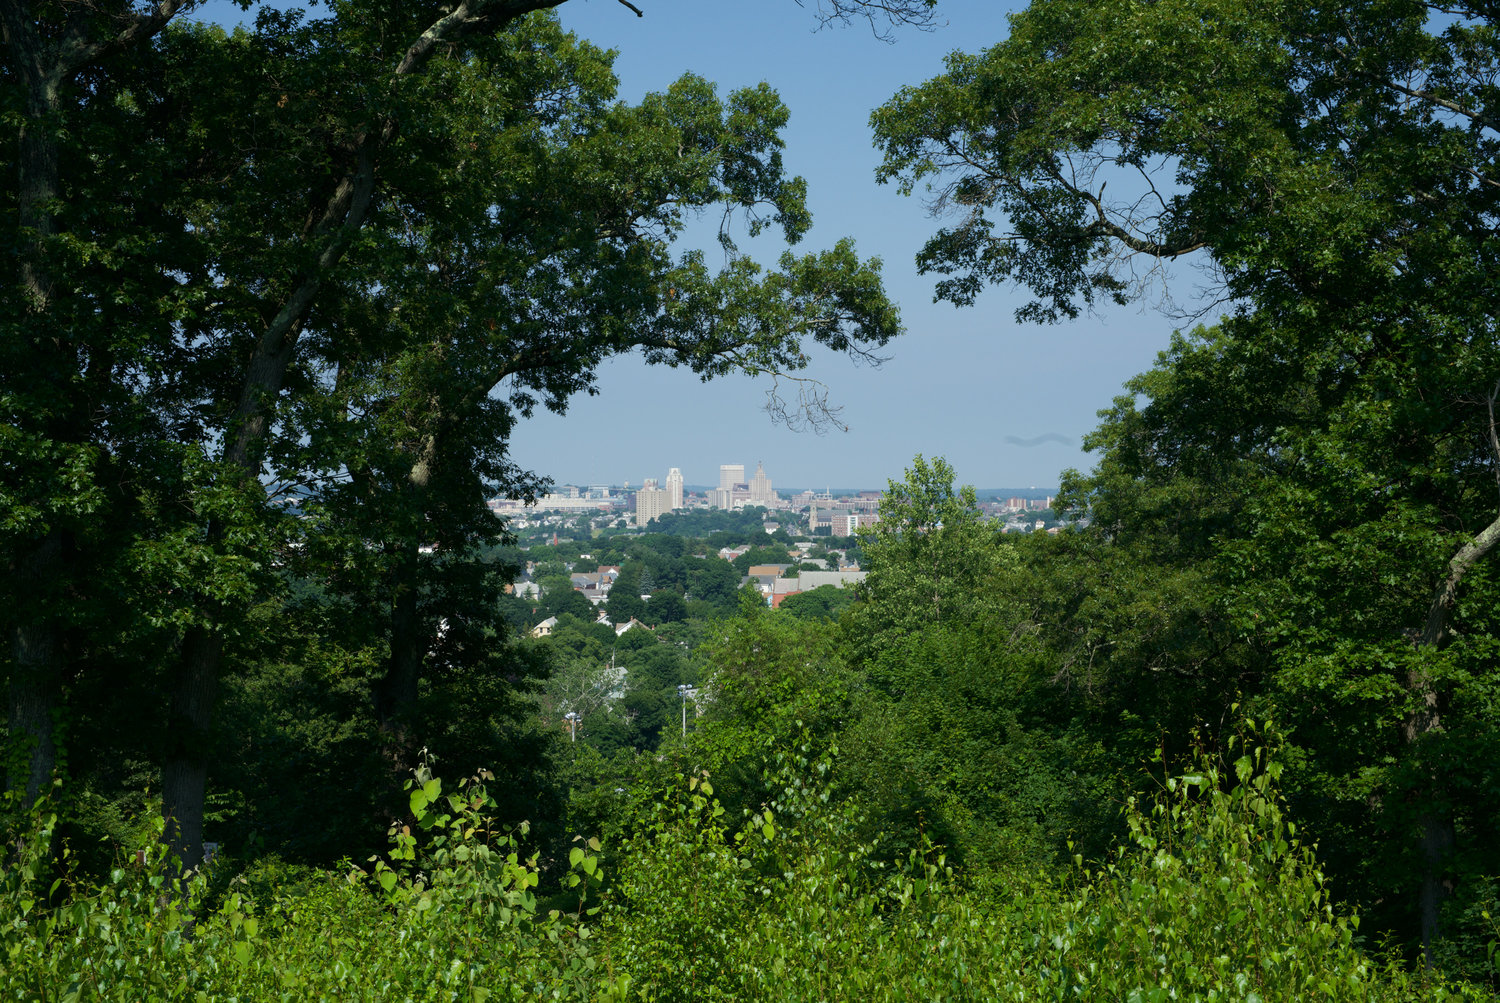 A view of the city from Neutaconkanut Hill Park